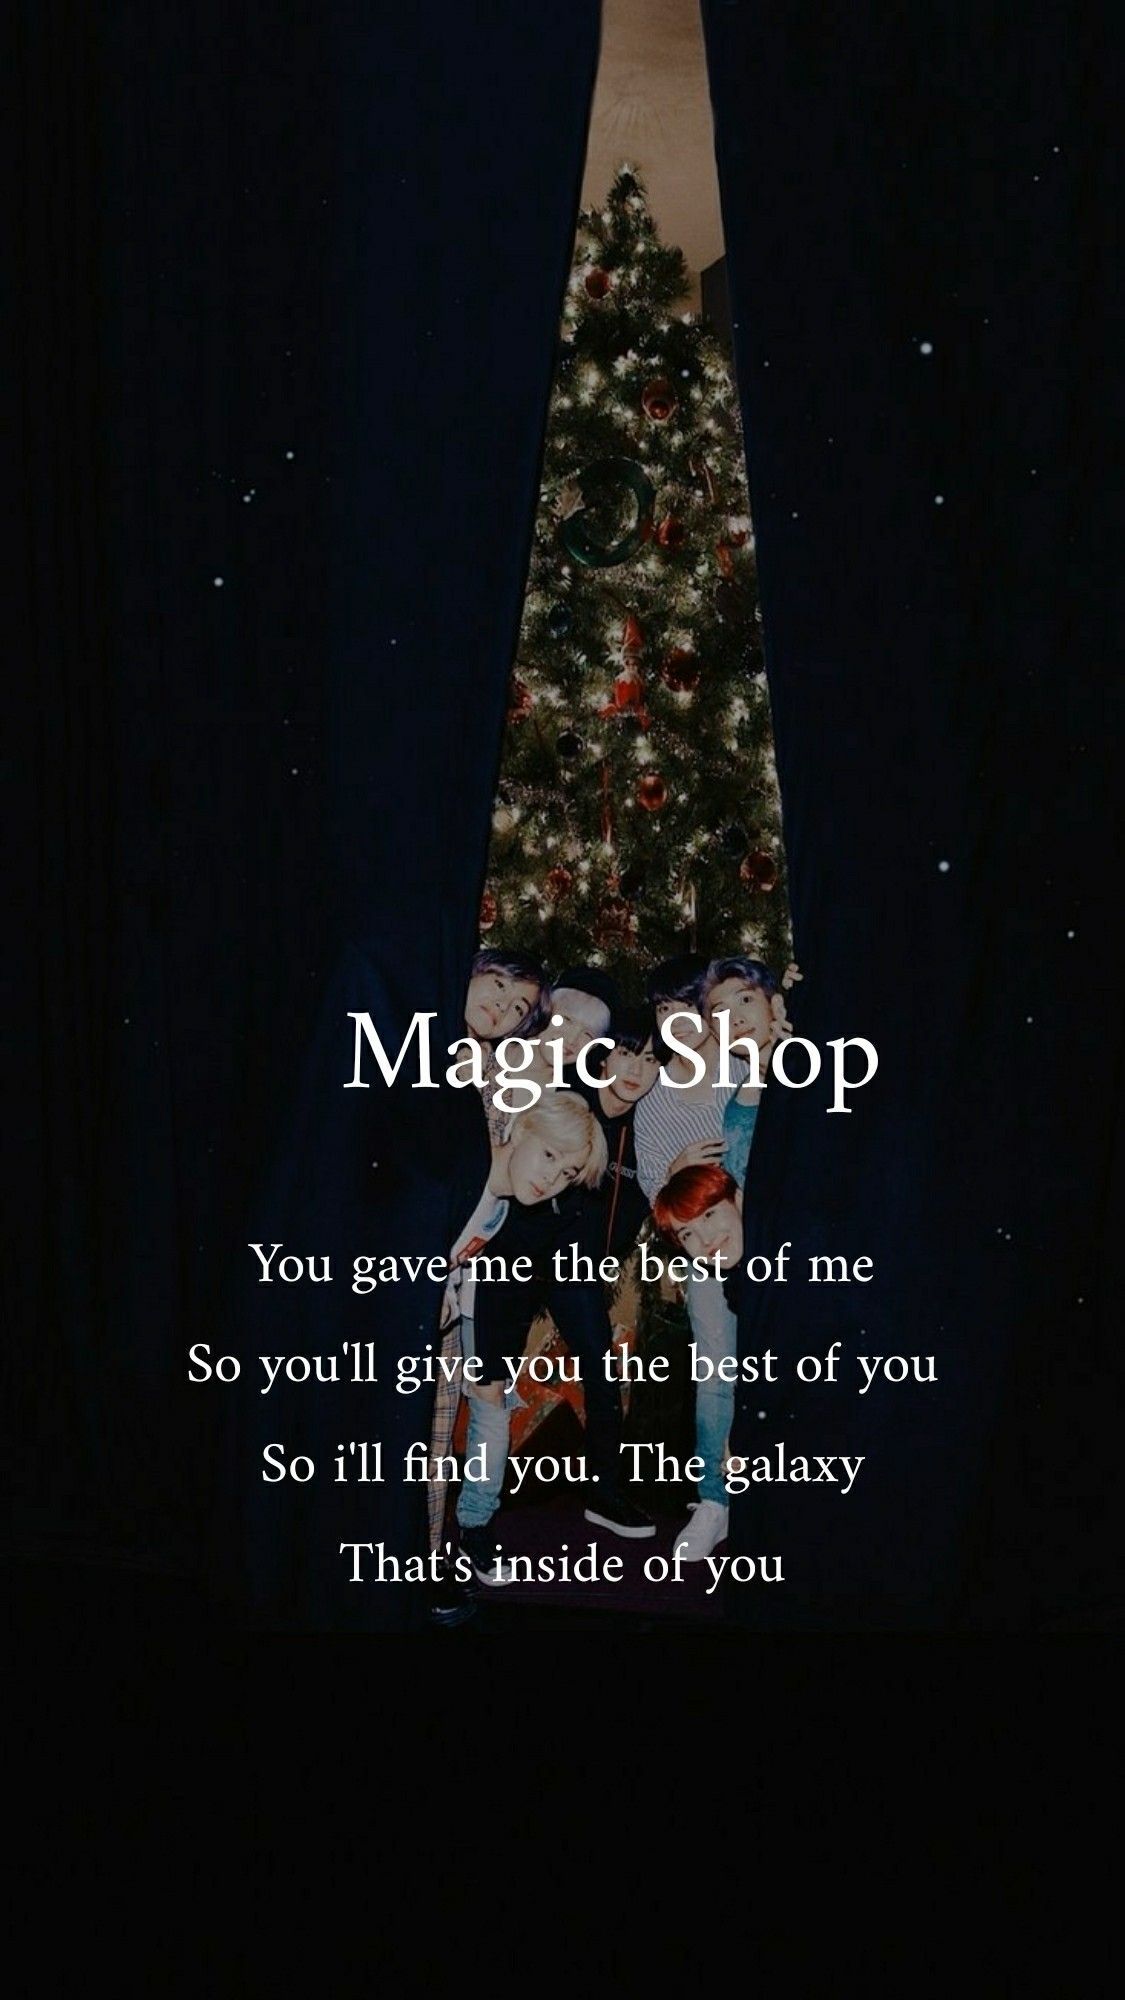 Bts Magic Shop Quotes Power of Words